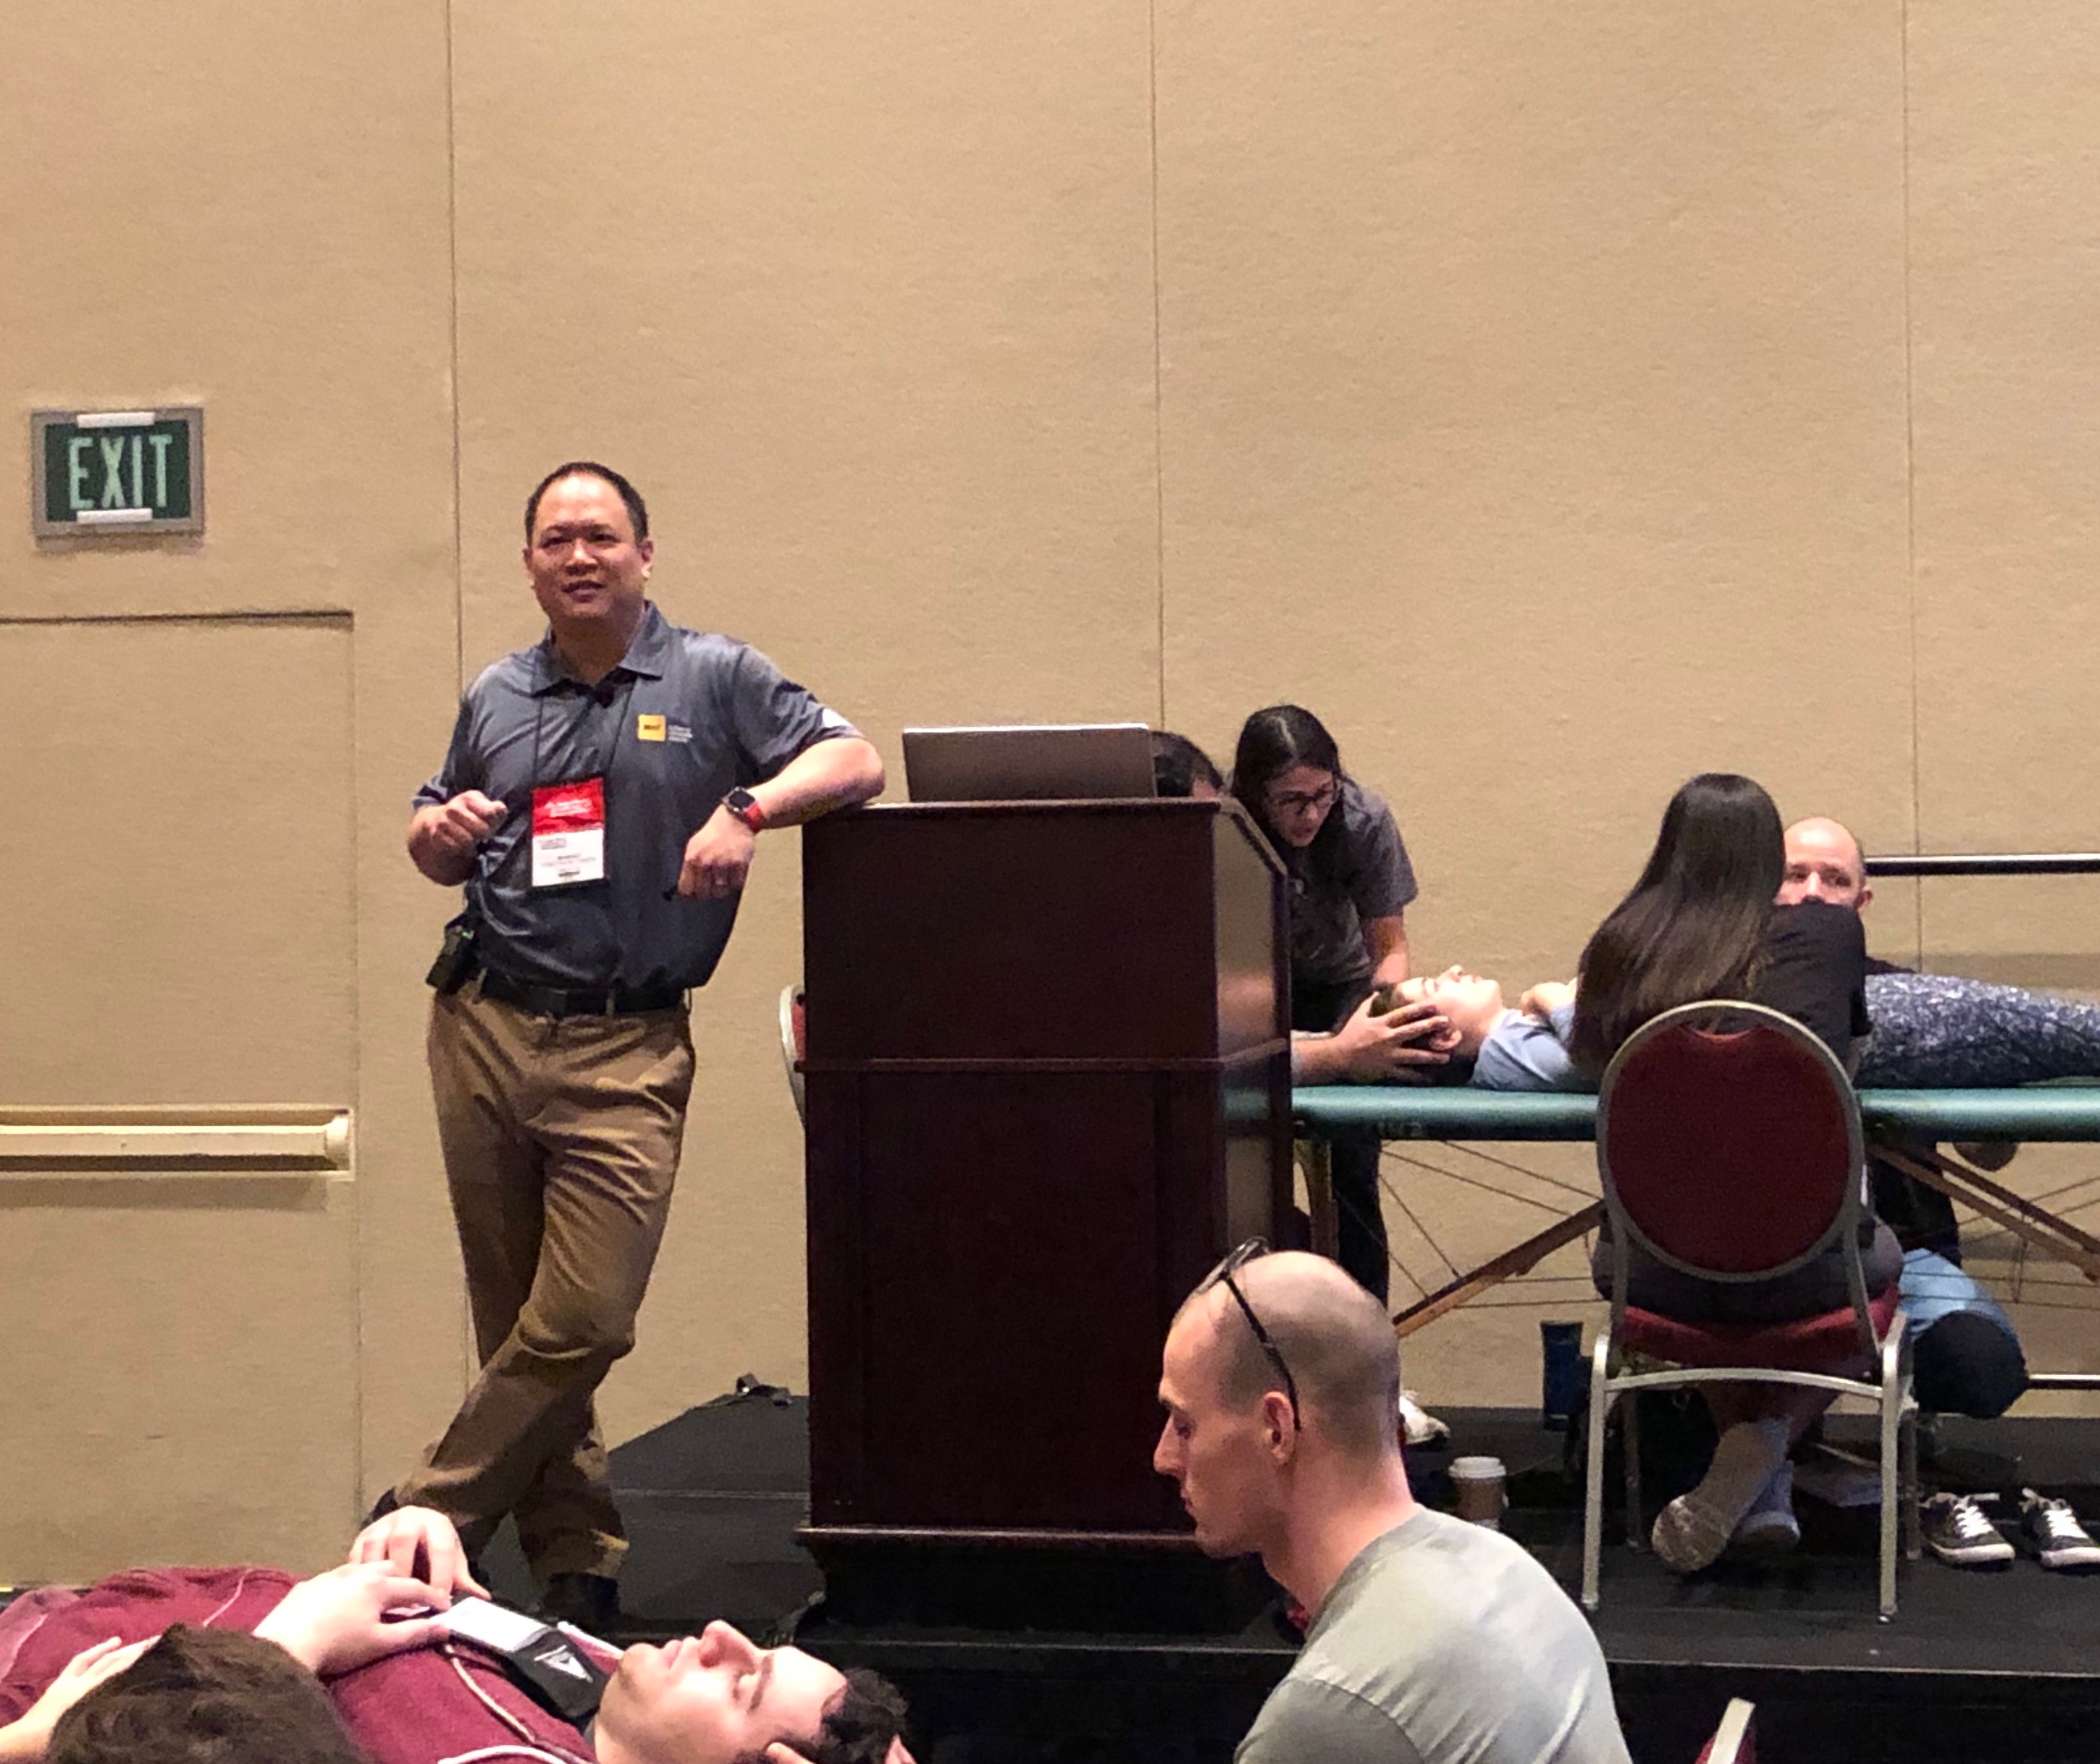 Dr. Sheldon Yao DO, leading an Osteopathic Manipulative Medicine workshop at the AAO Convocation 2019